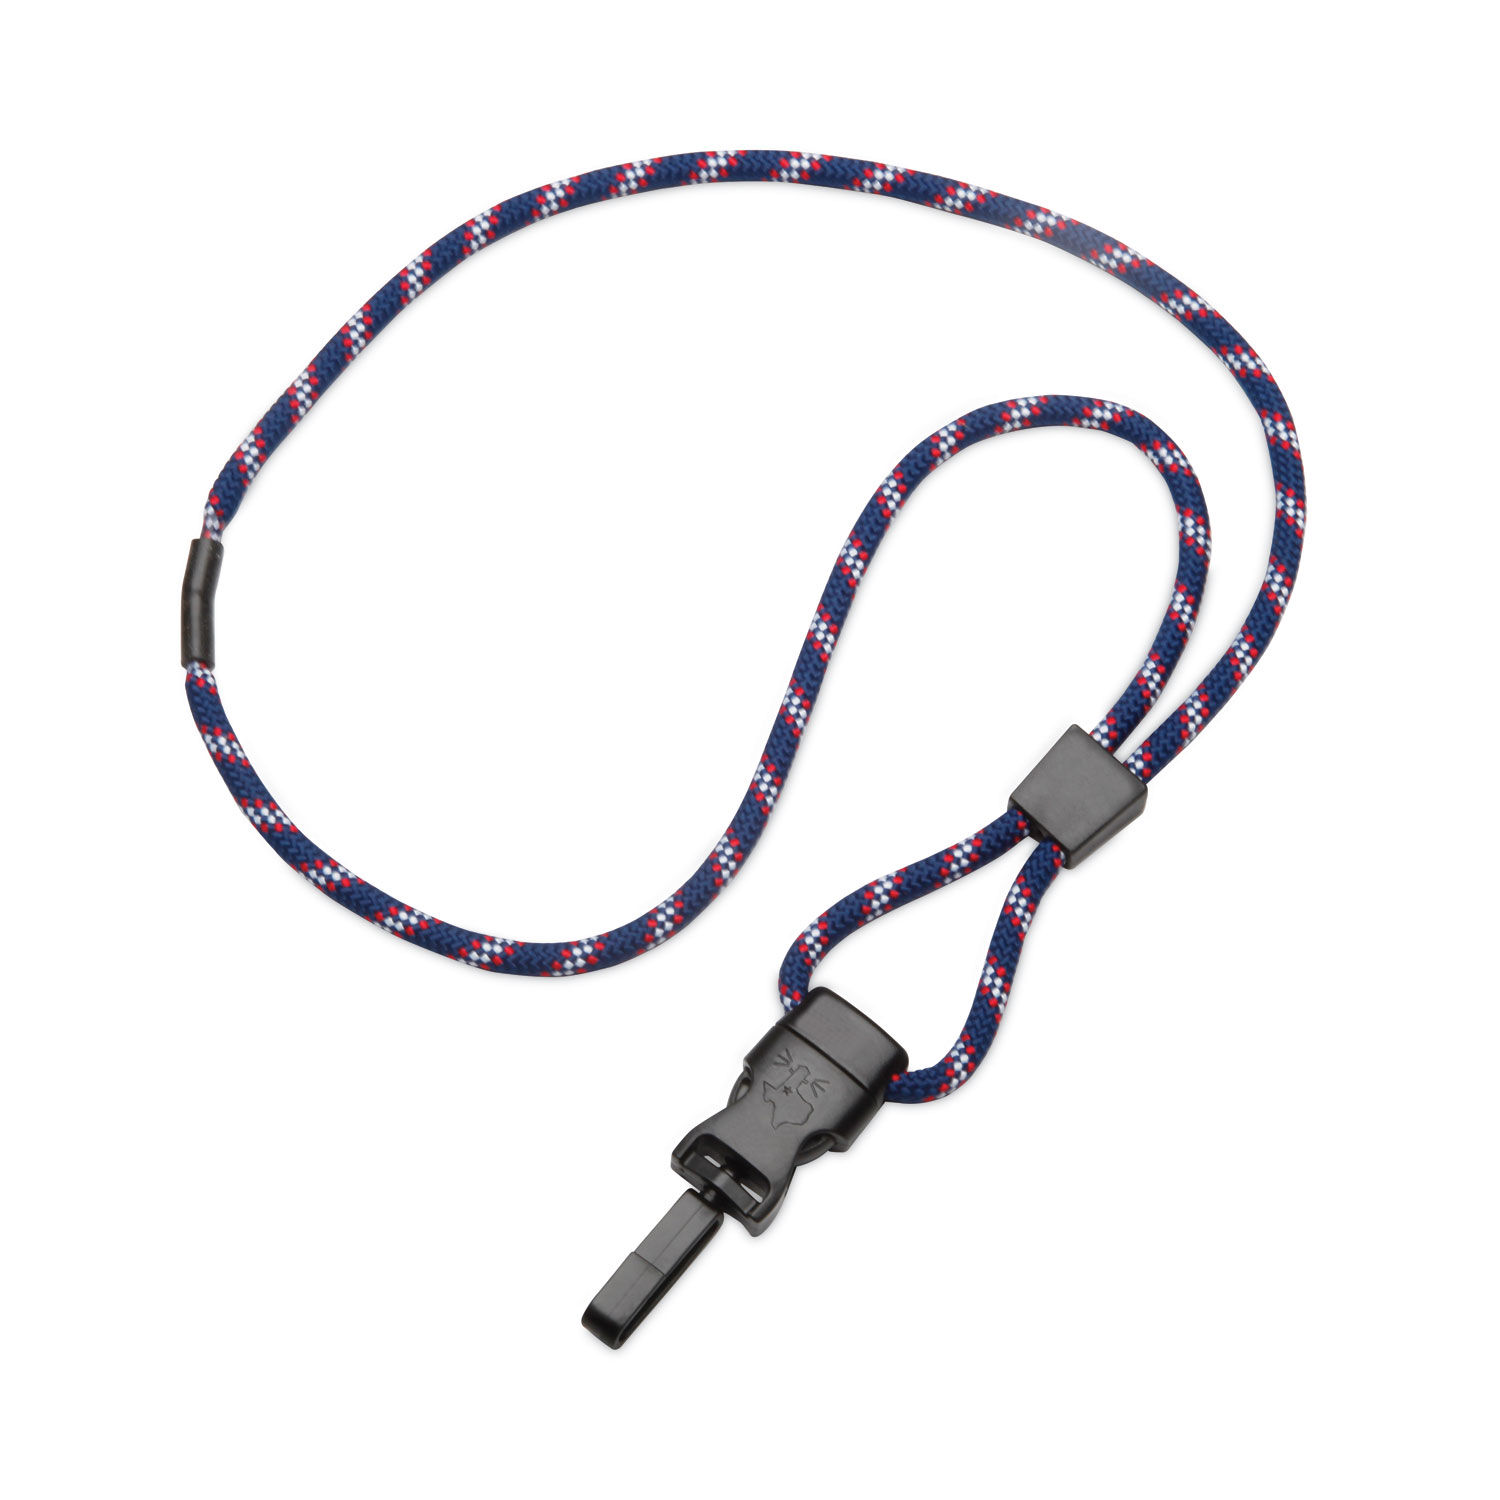 Marco Value Lanyard Neck Cord